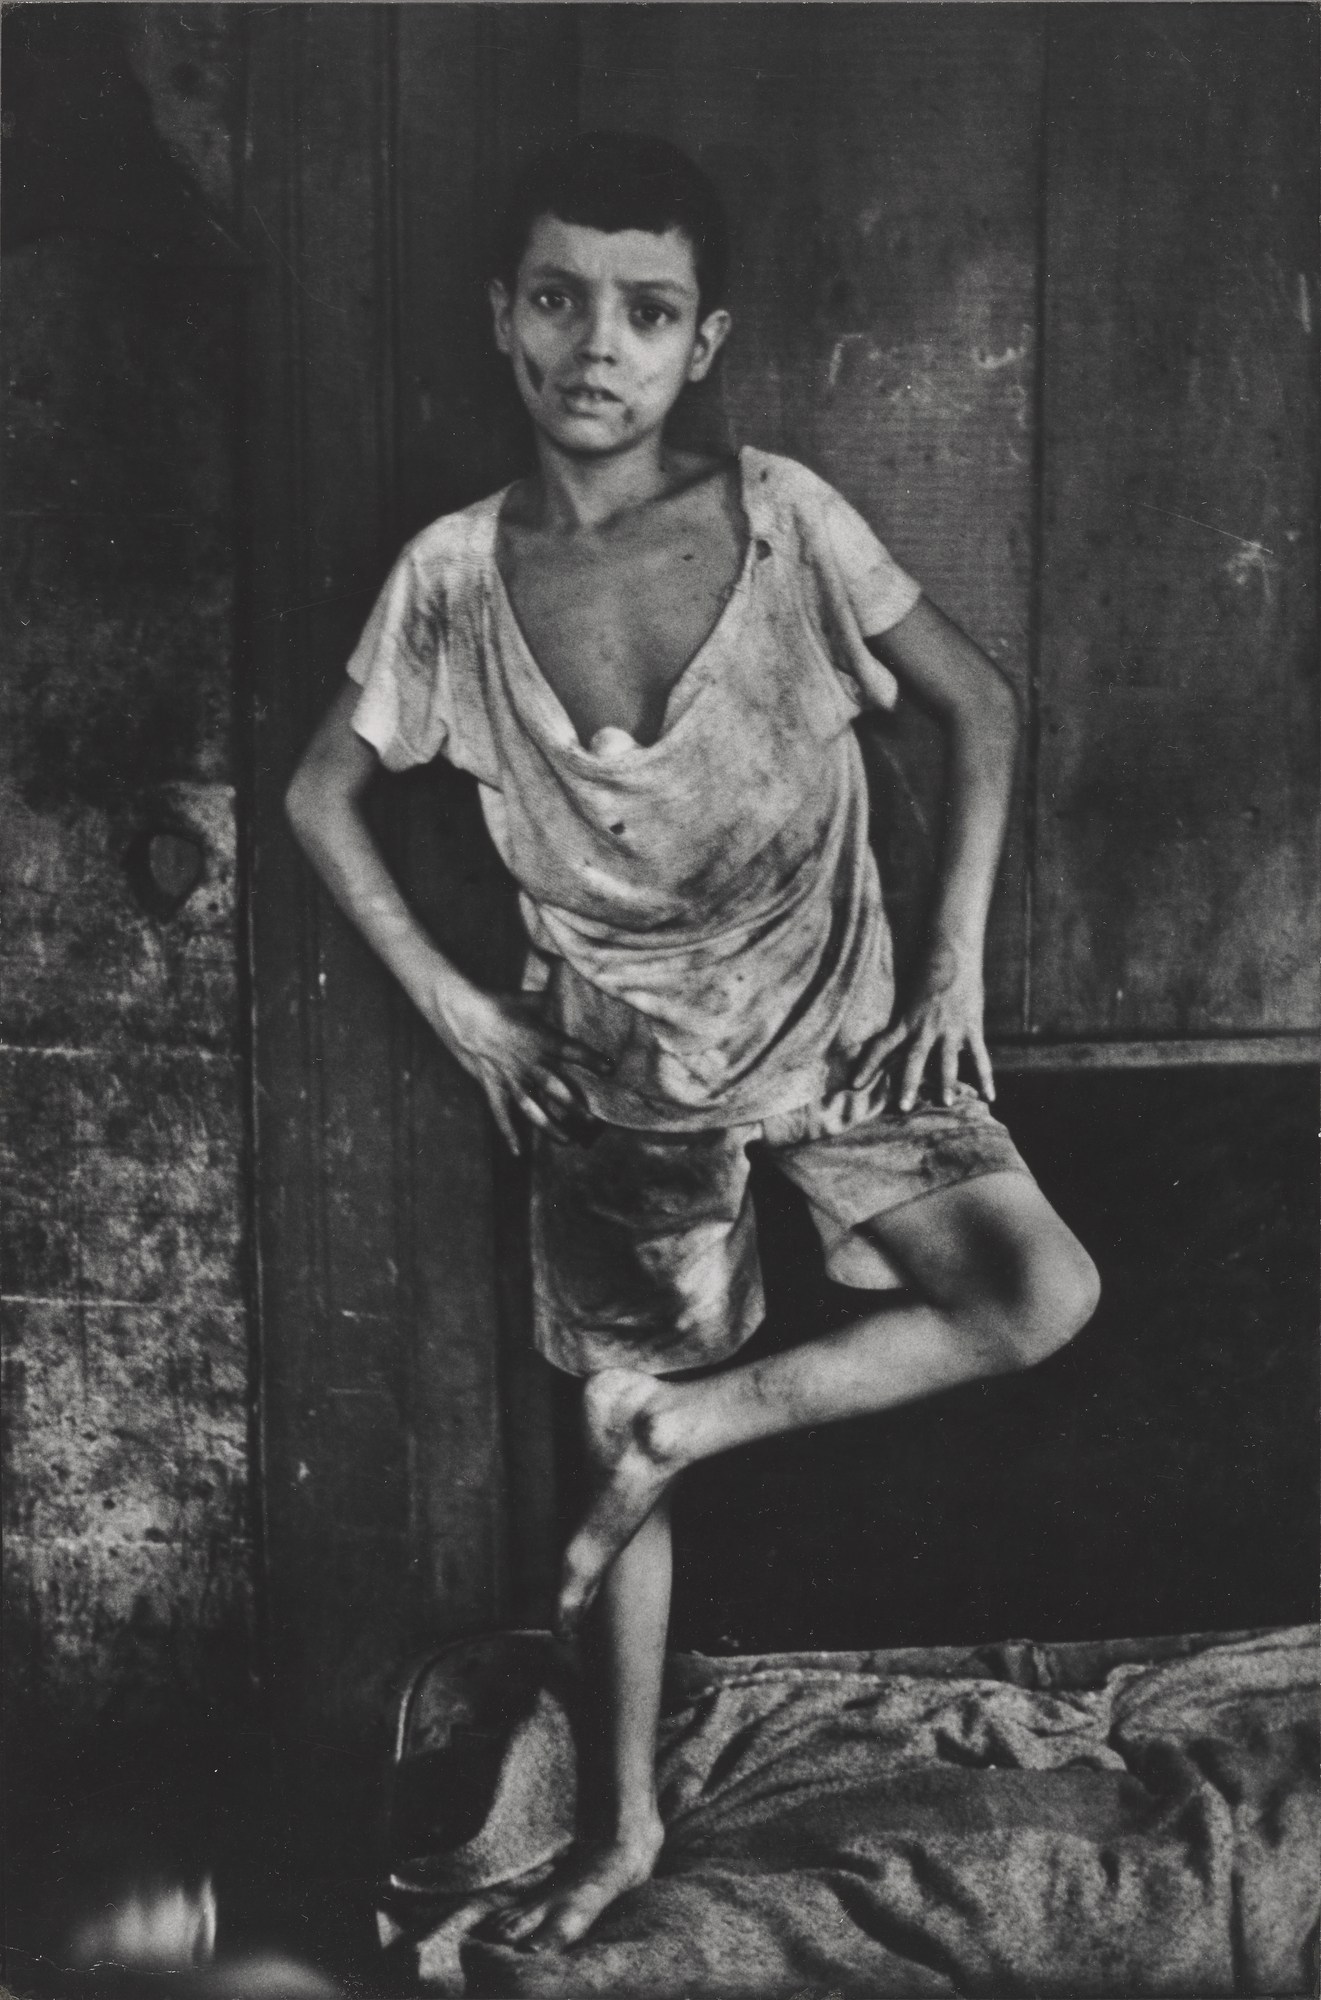 Do You Know the ‘Flávio’ Story? Why These Photographs from Brazilian Favelas in 1961 Resonate Today